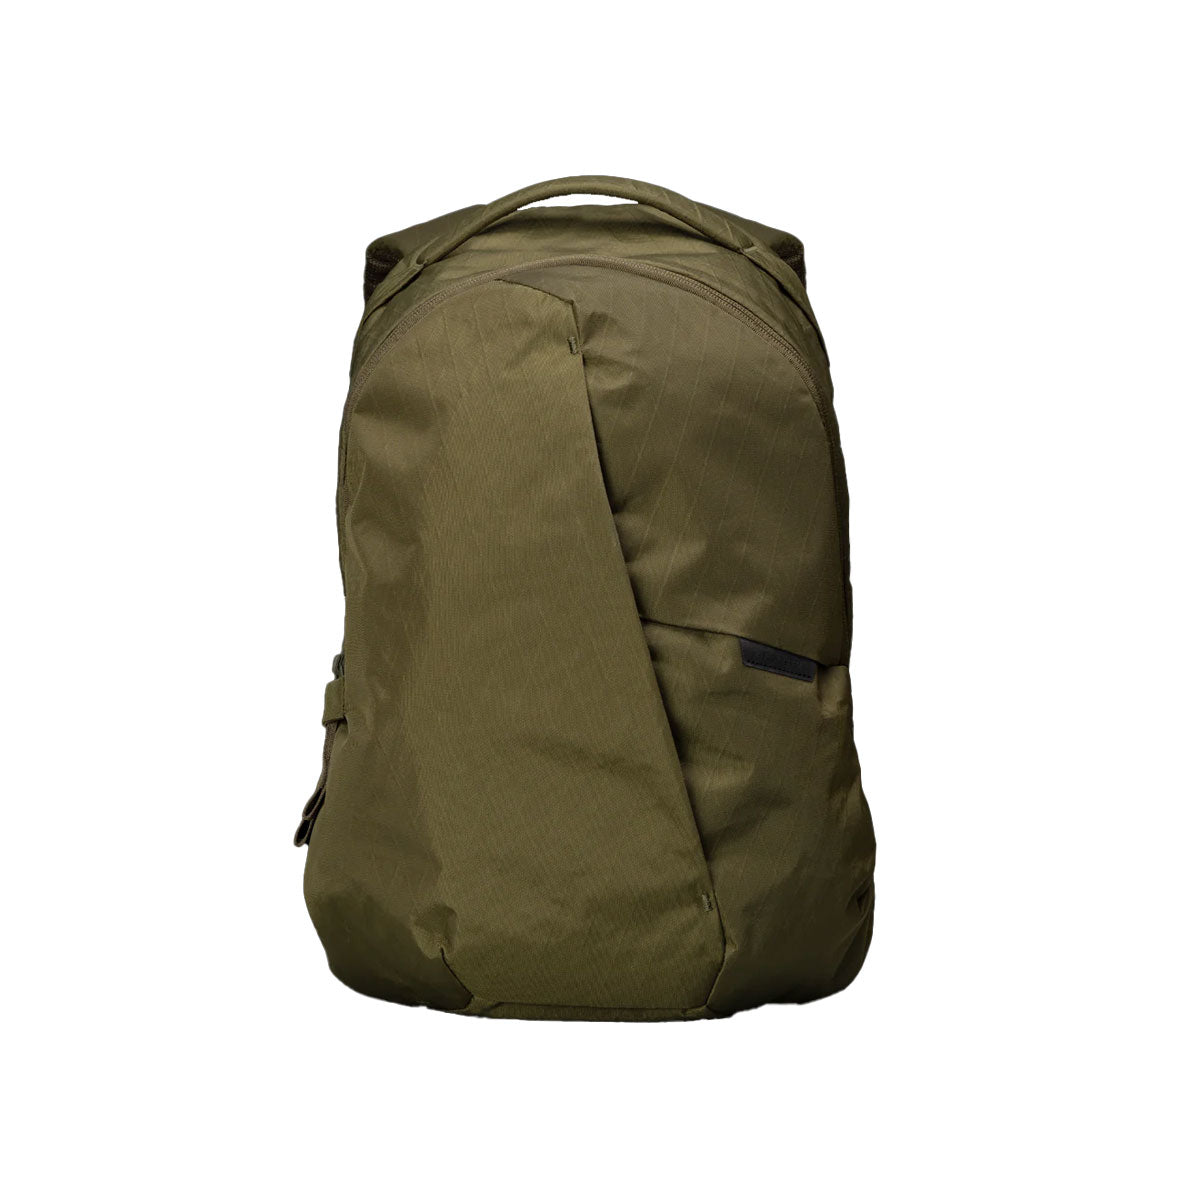 Able Carry : Thirteen Daybag : X-Pac Olive Green (X42)